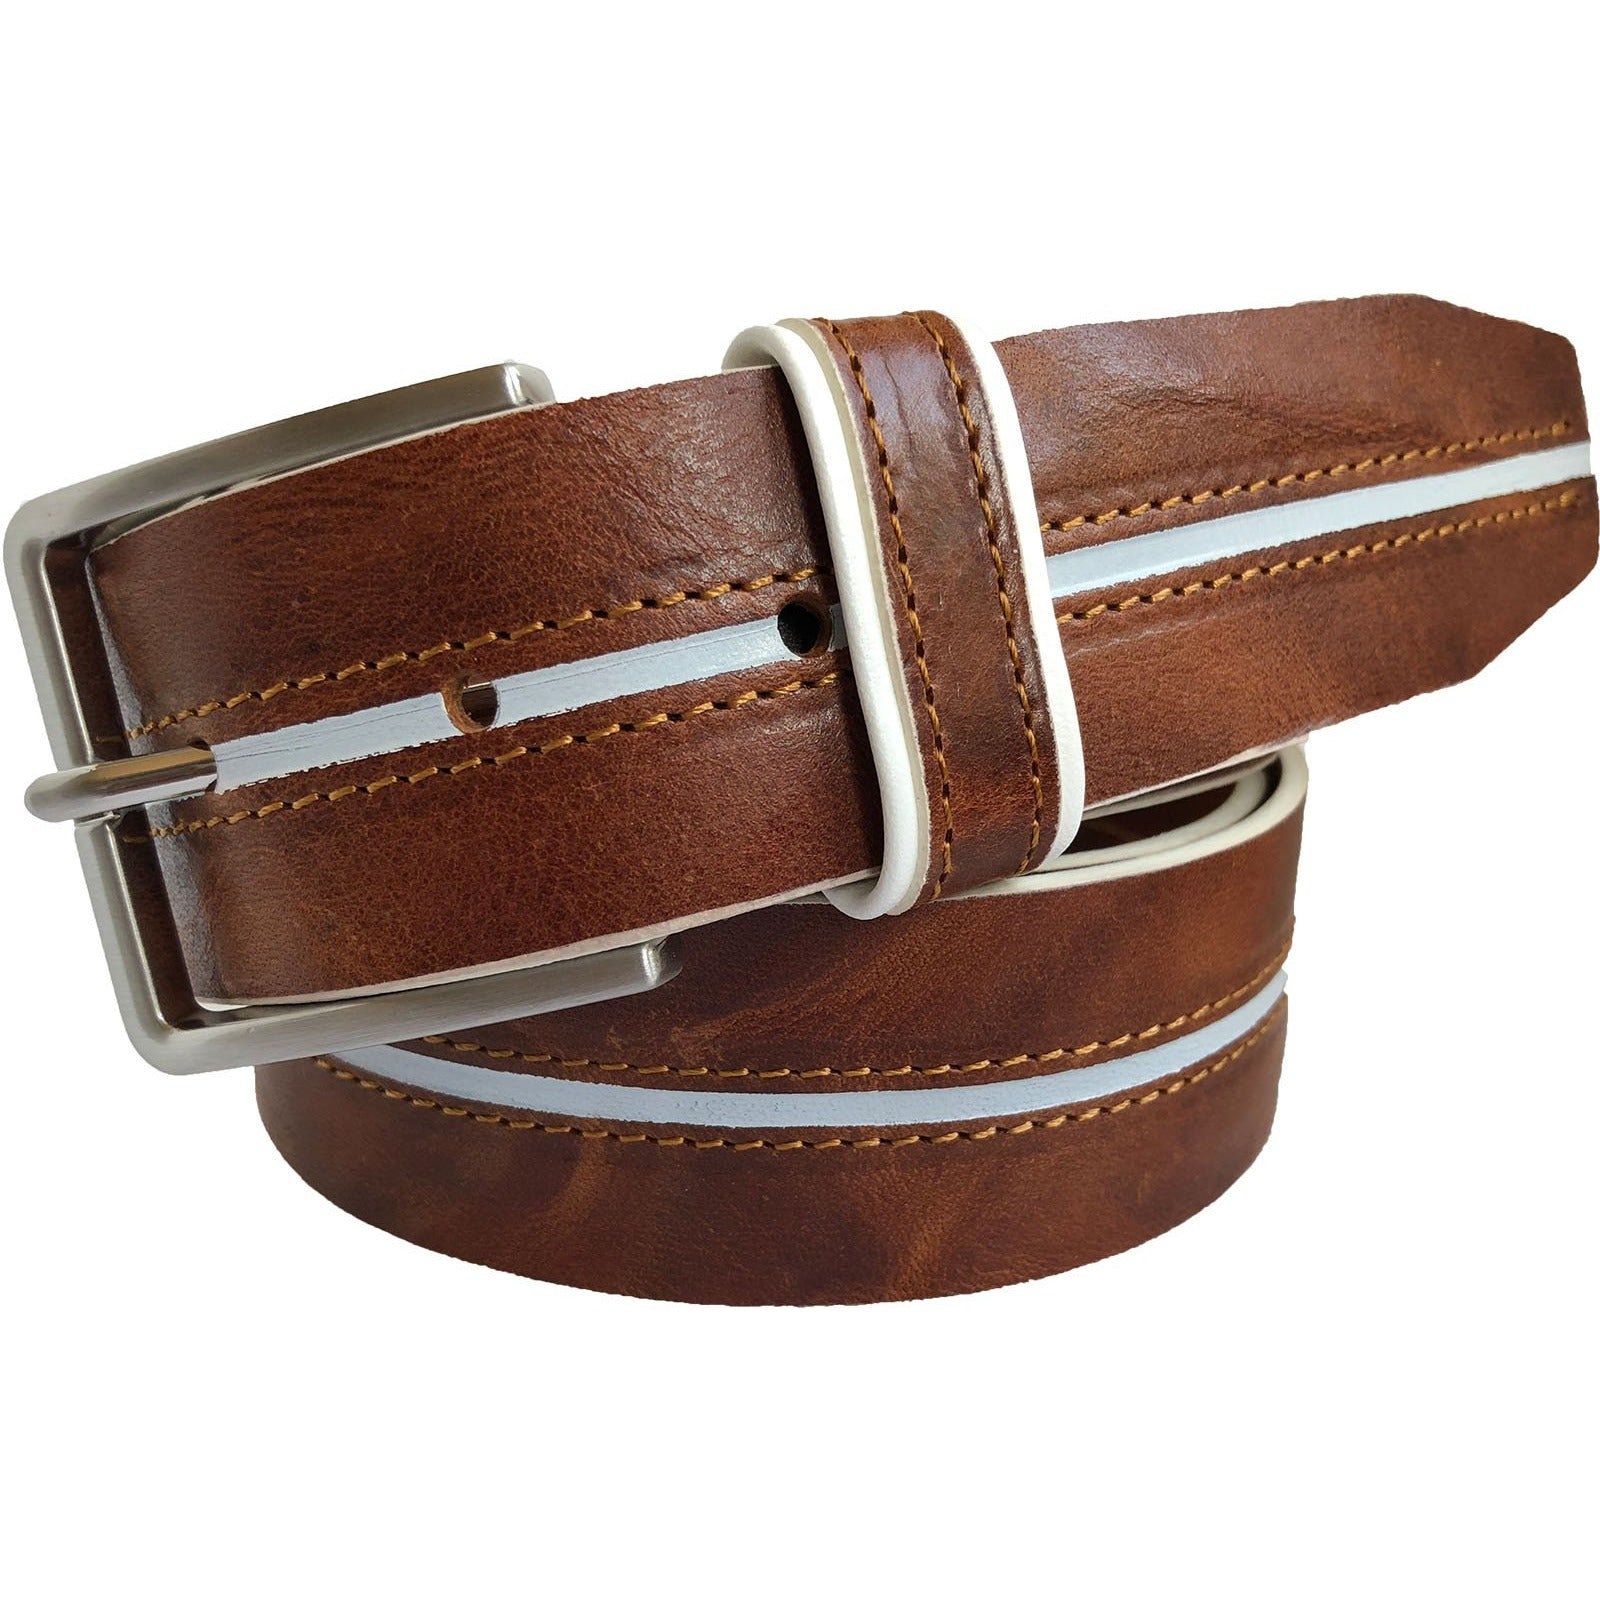 BROWN & WHITE HAND PAINTED HIDE LEATHER BELT